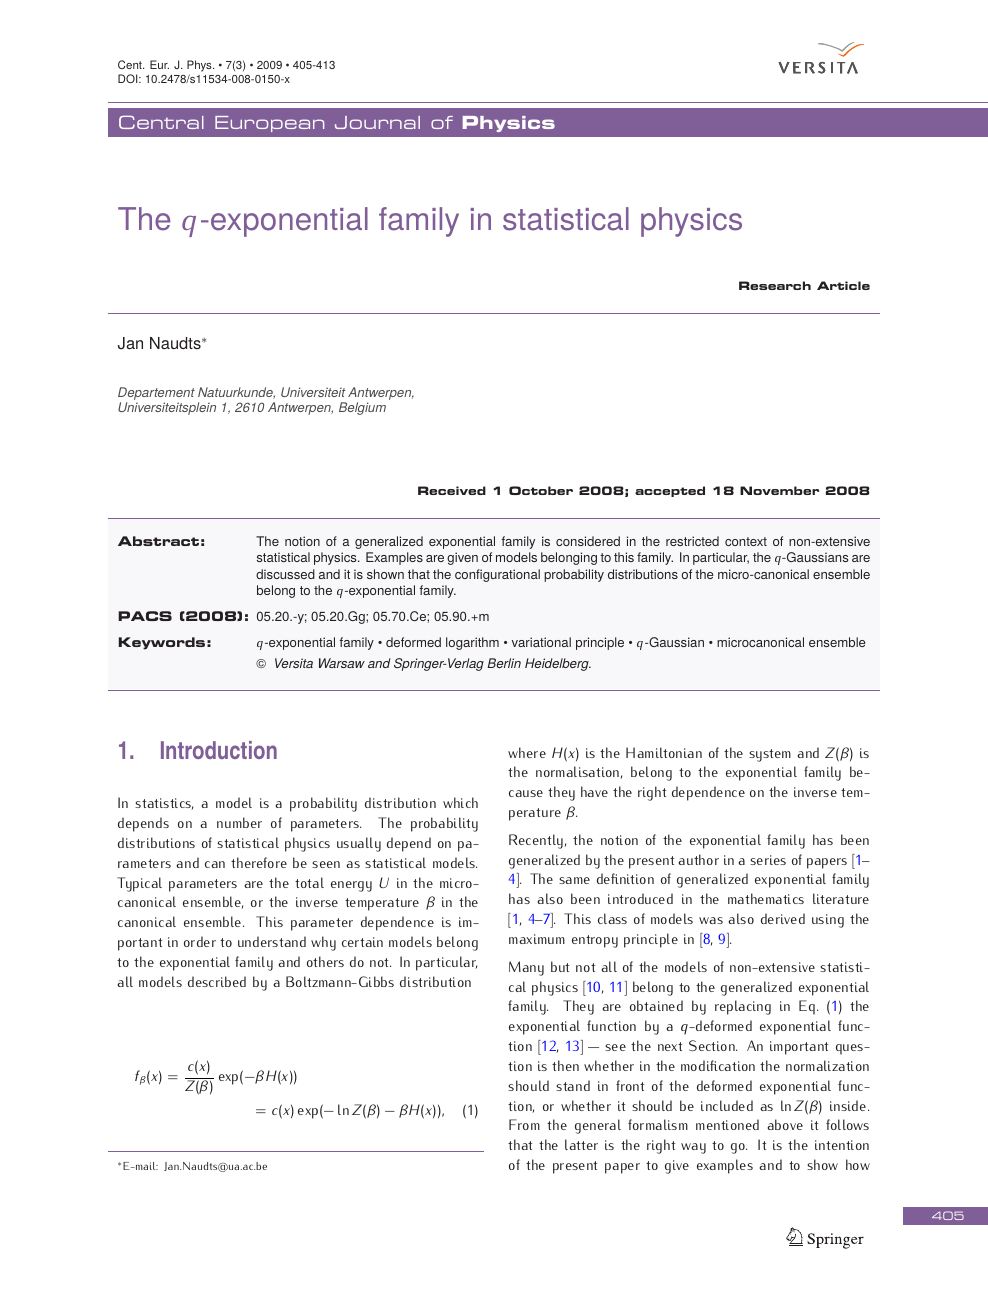 The Q Exponential Family In Statistical Physics Topic Of Research Paper In Physical Sciences Download Scholarly Article Pdf And Read For Free On Cyberleninka Open Science Hub